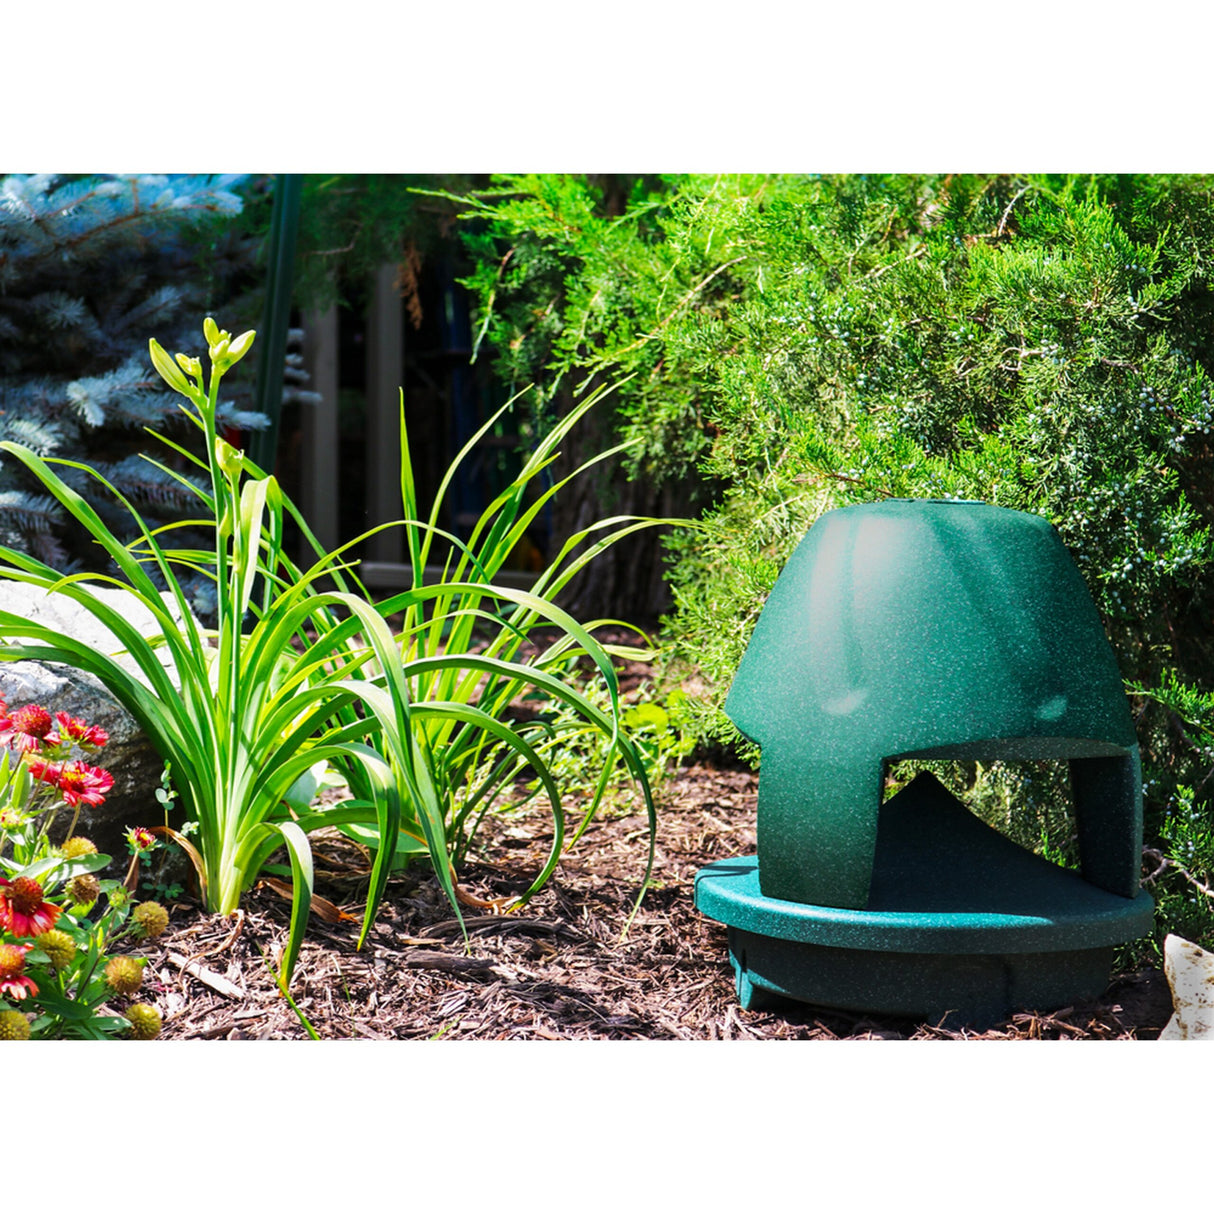 SoundTube IPD-XT850-GN 8-Inch IP-Addressable 2-Way Outdoor Speaker System, Green